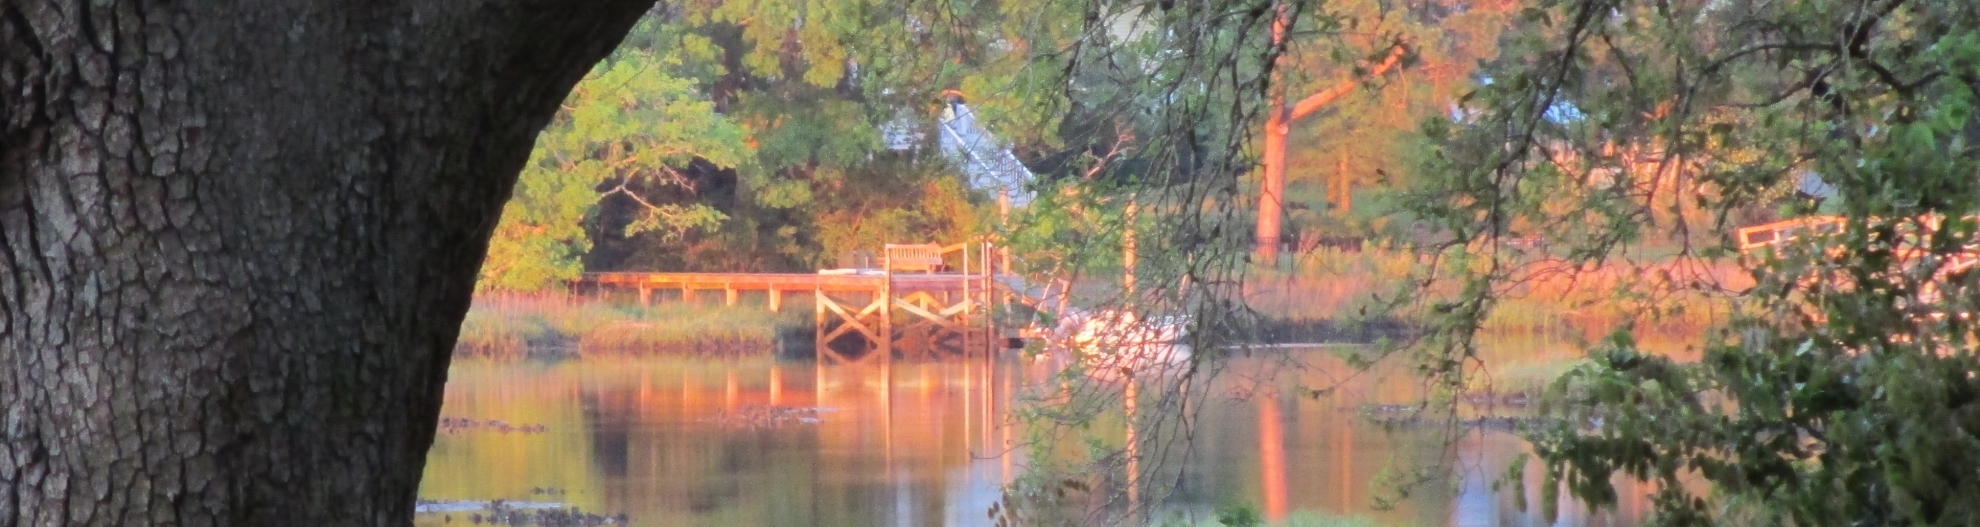 image of a lake with a tree in the foreground and dock in the background